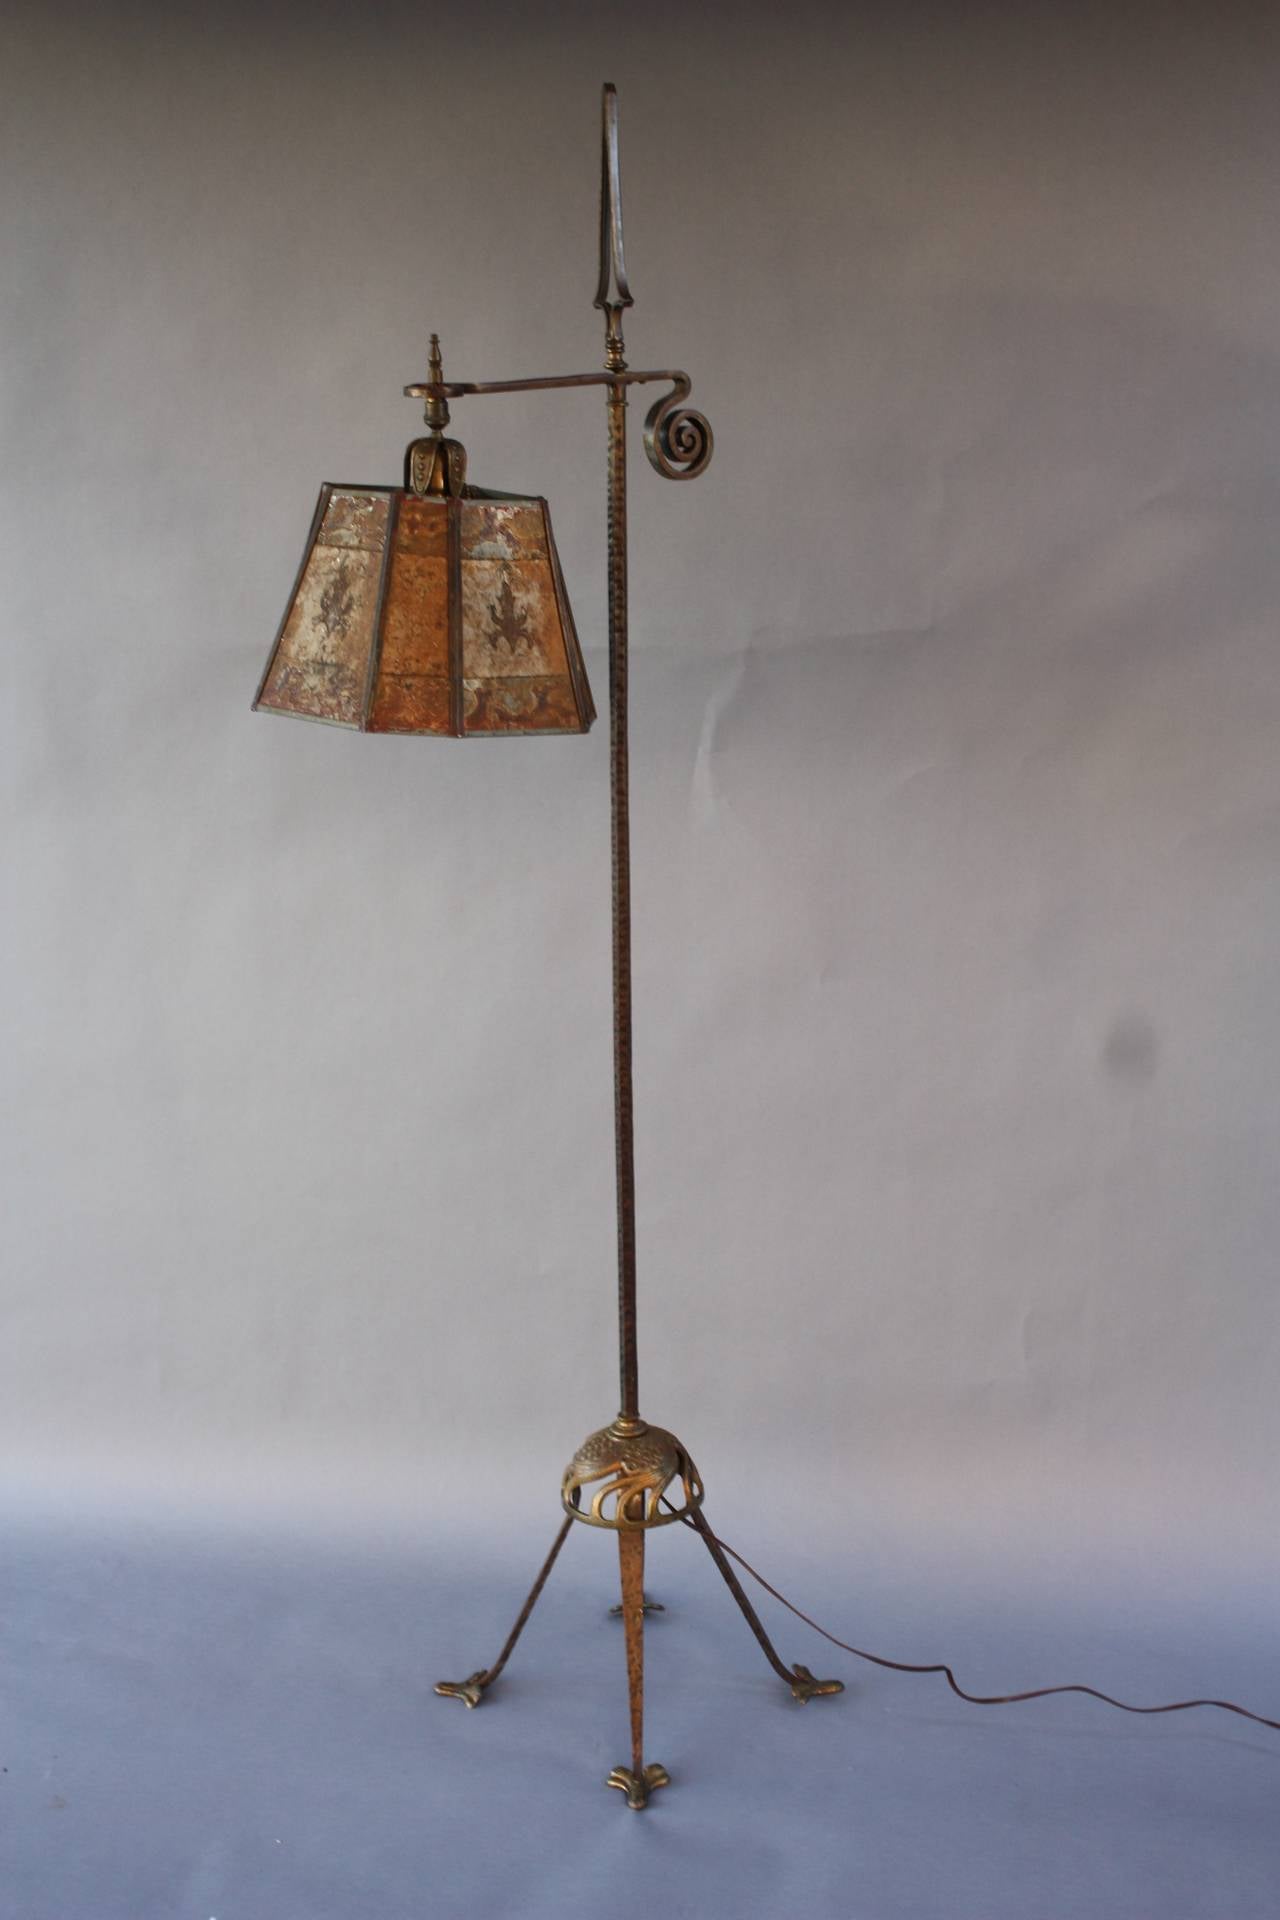 Circa 1920's. Fantastic floor lamp with exceptional metal work.